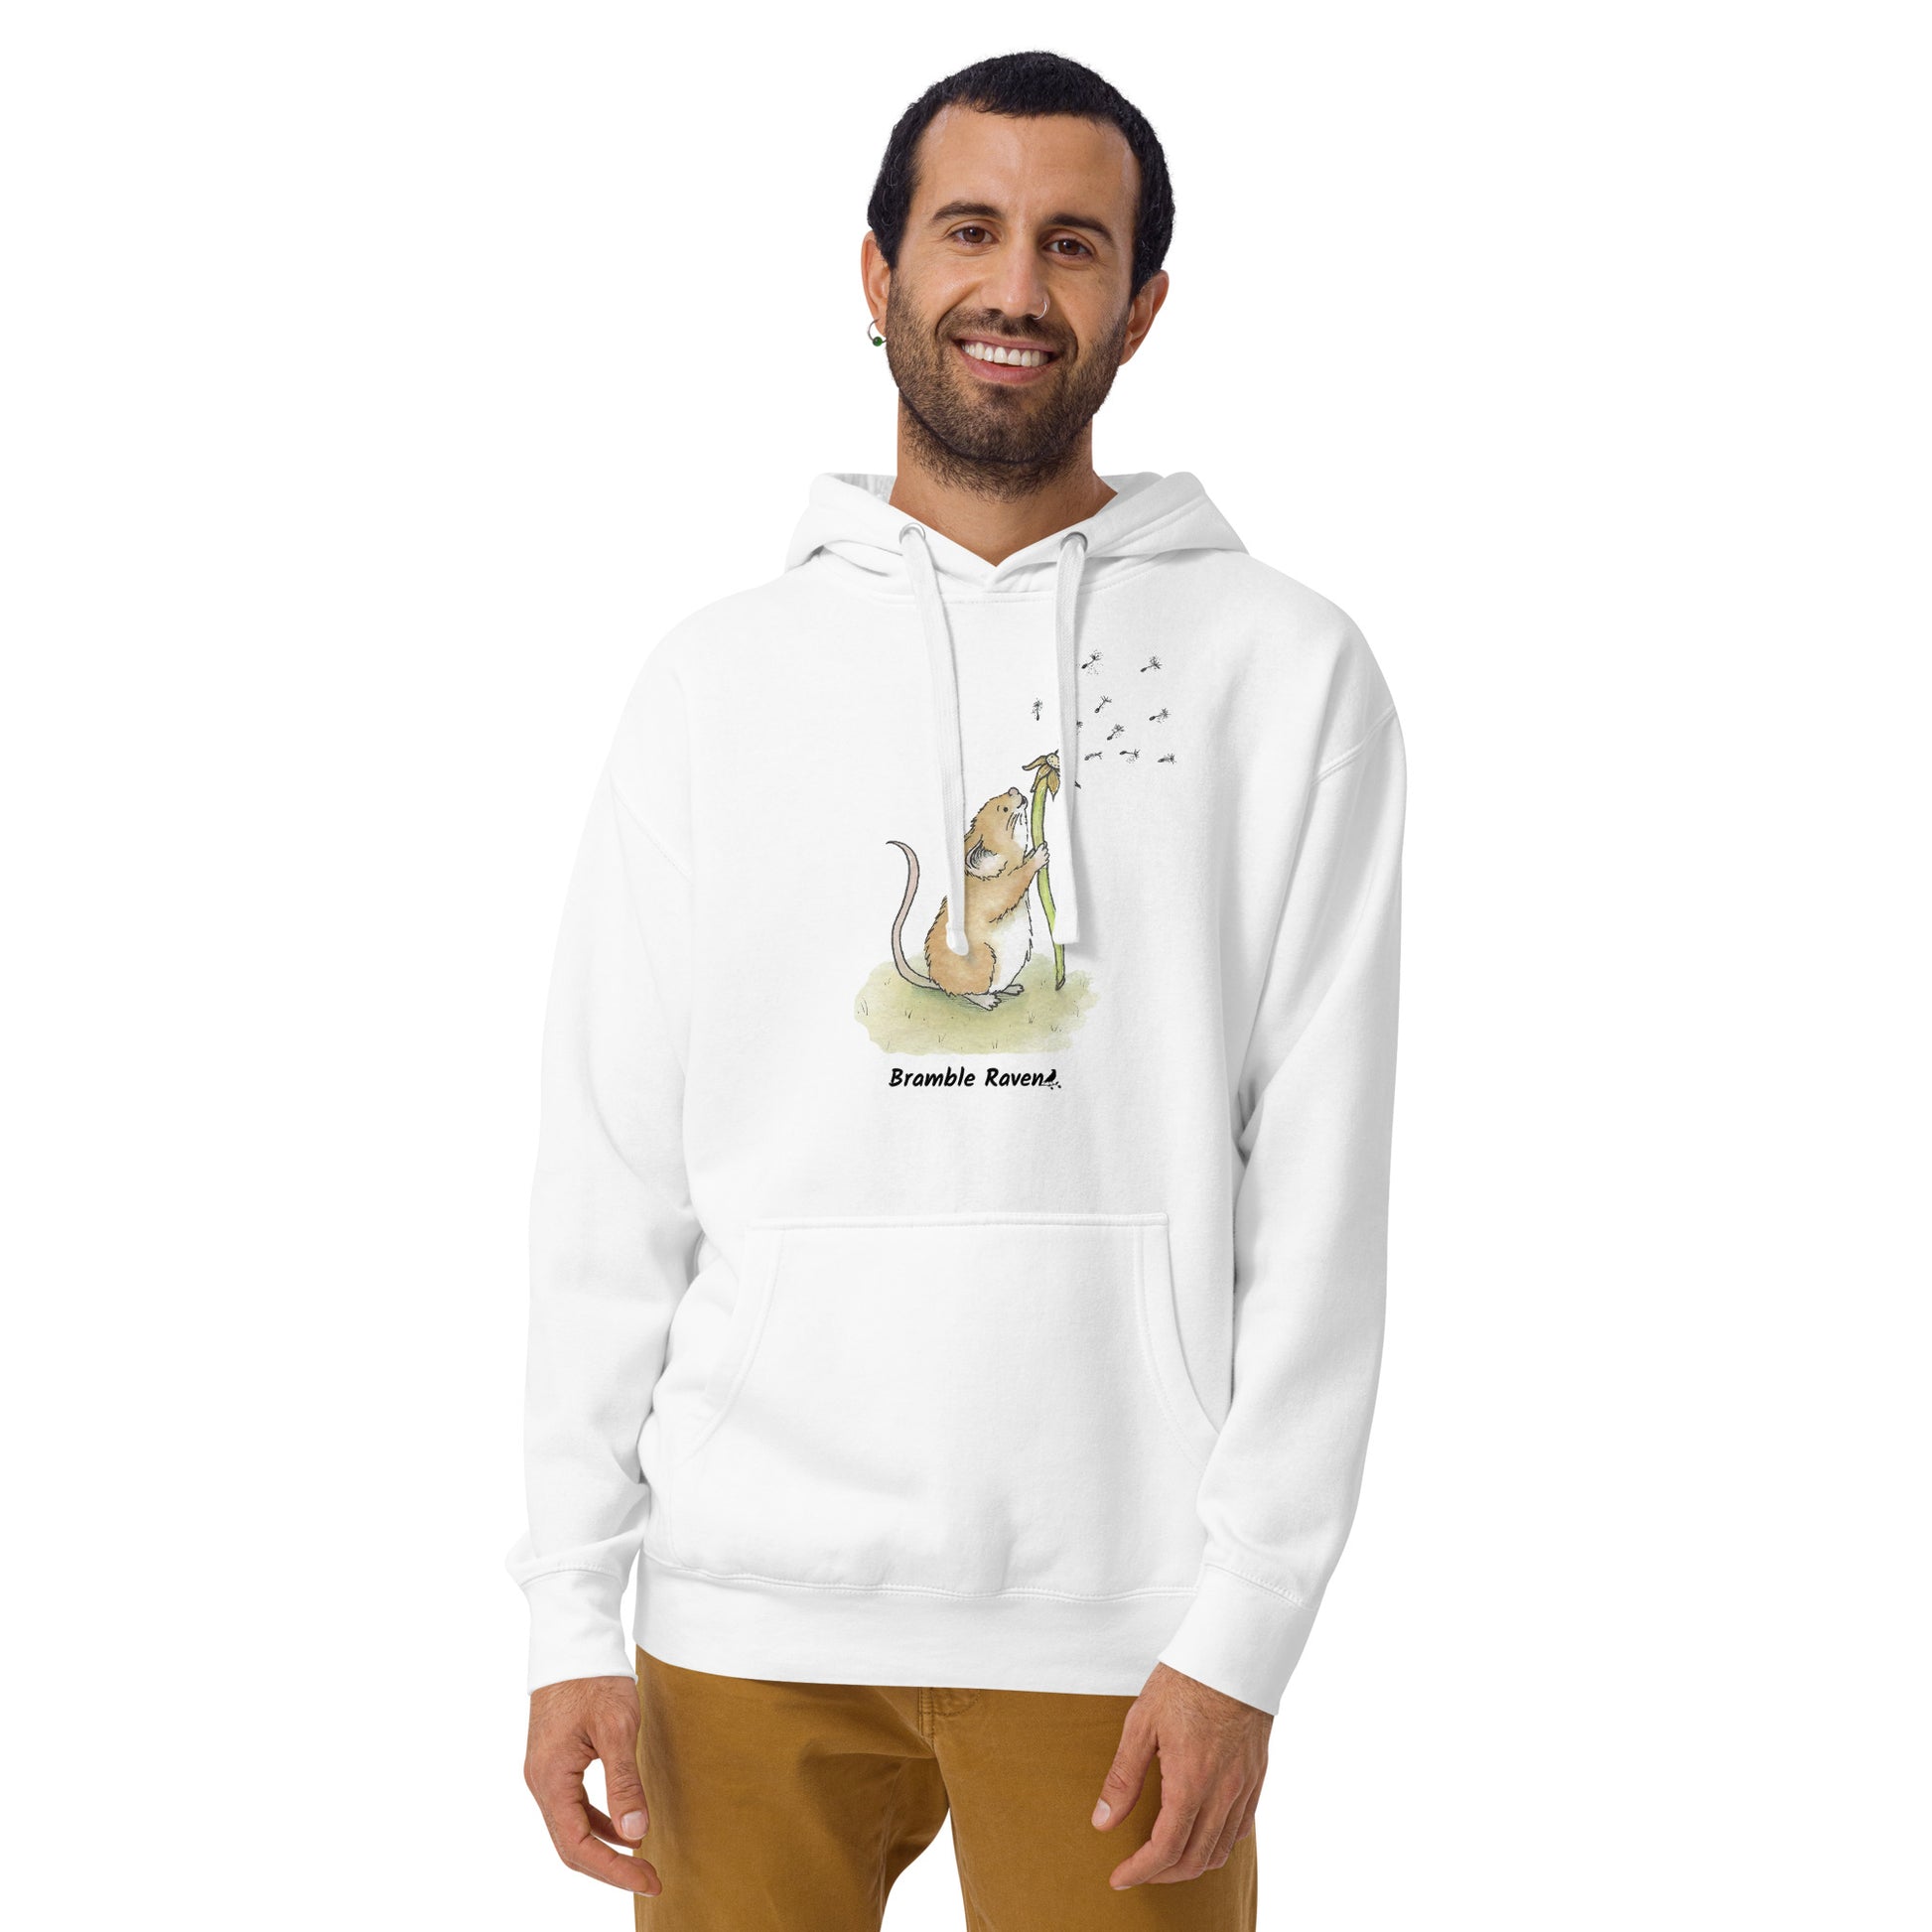 Original Dandelion wish design of cute watercolor mouse blowing dandelion seeds  featured on unisex white colored hoodie shown on male model